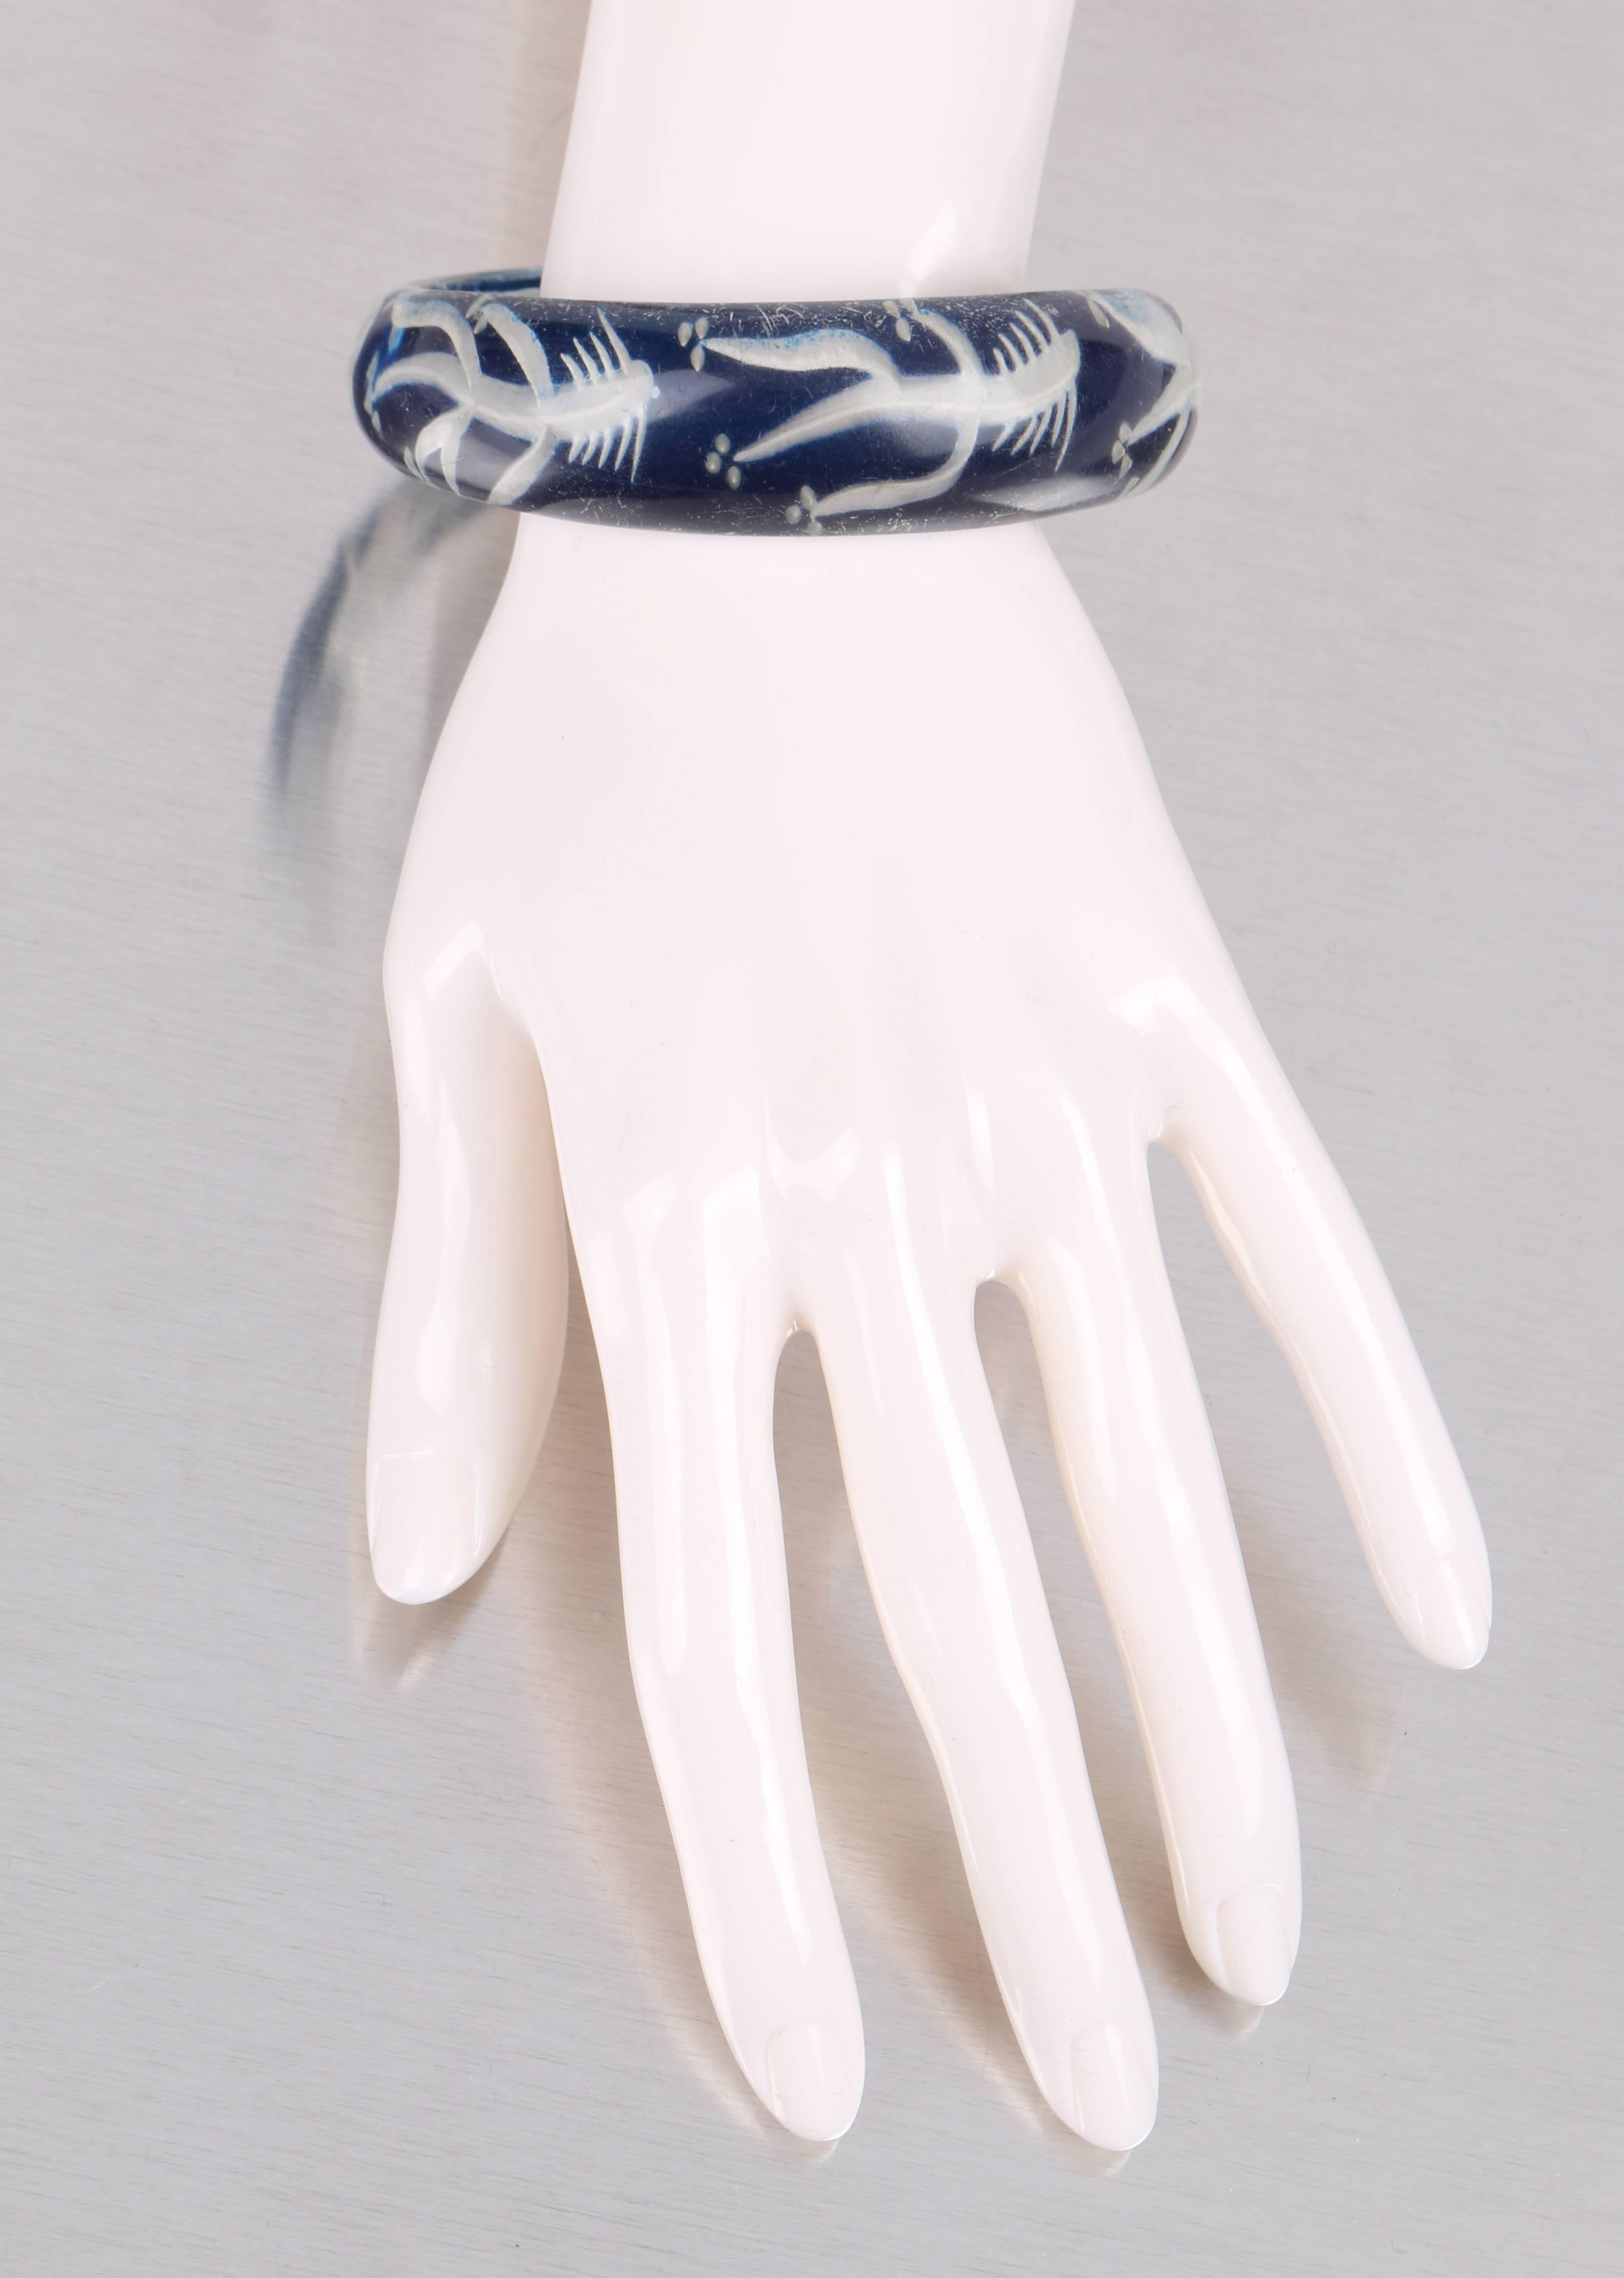 c.1930s-1940s Blue Plastic Lucite Reversed Handcarved Fish Bone Bangle Bracelet In Good Condition For Sale In Thiensville, WI